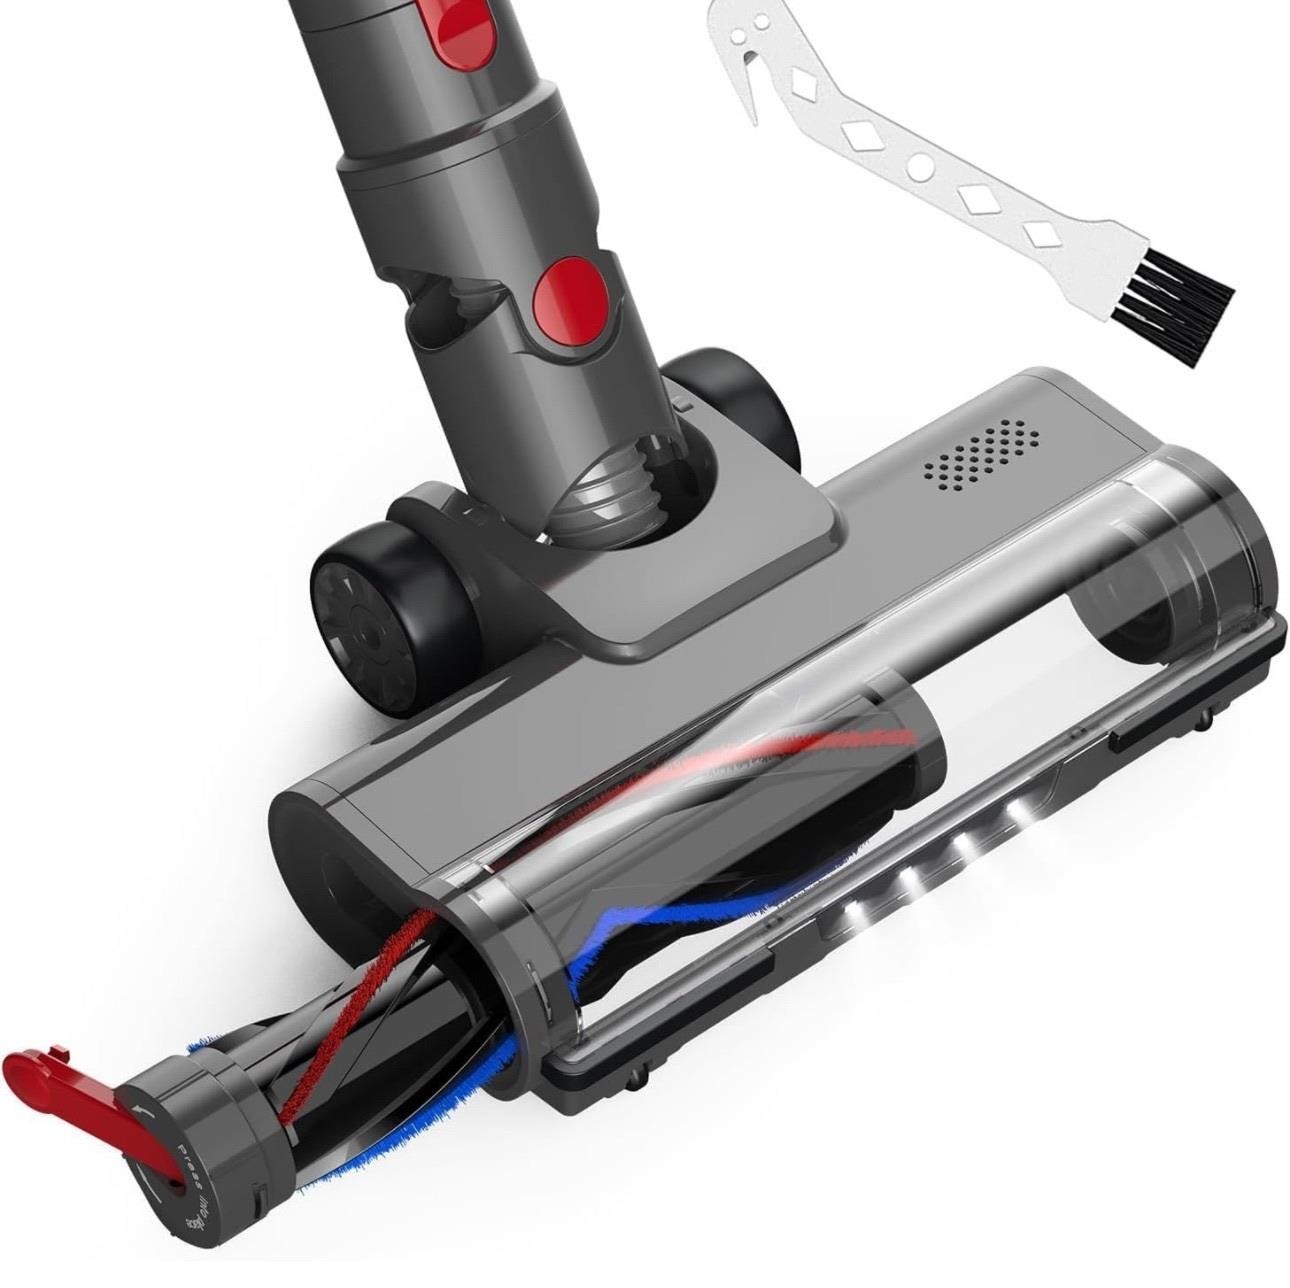 ($69) Ancocs Vacuum Cleaners Parts for Dyson